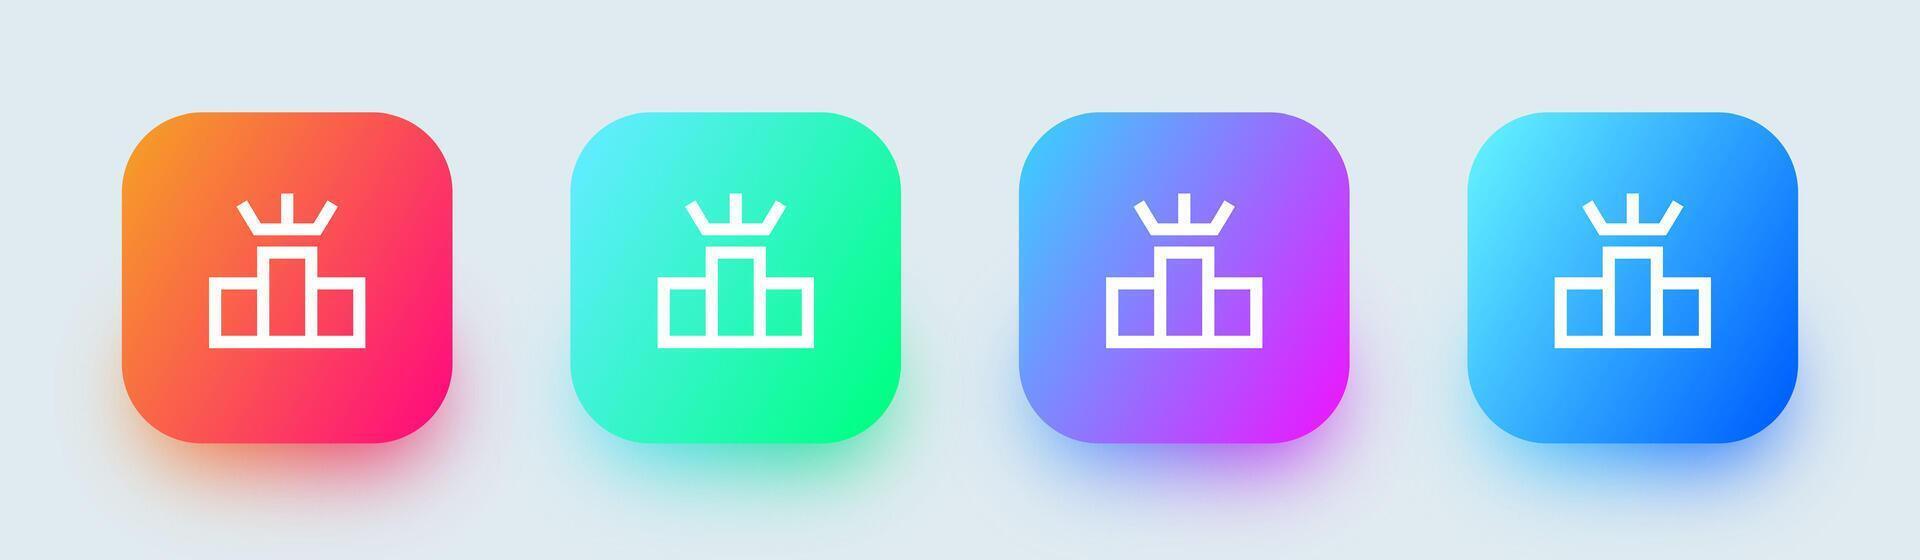 Leader board line icon in square gradient colors. Competition signs illustration. vector